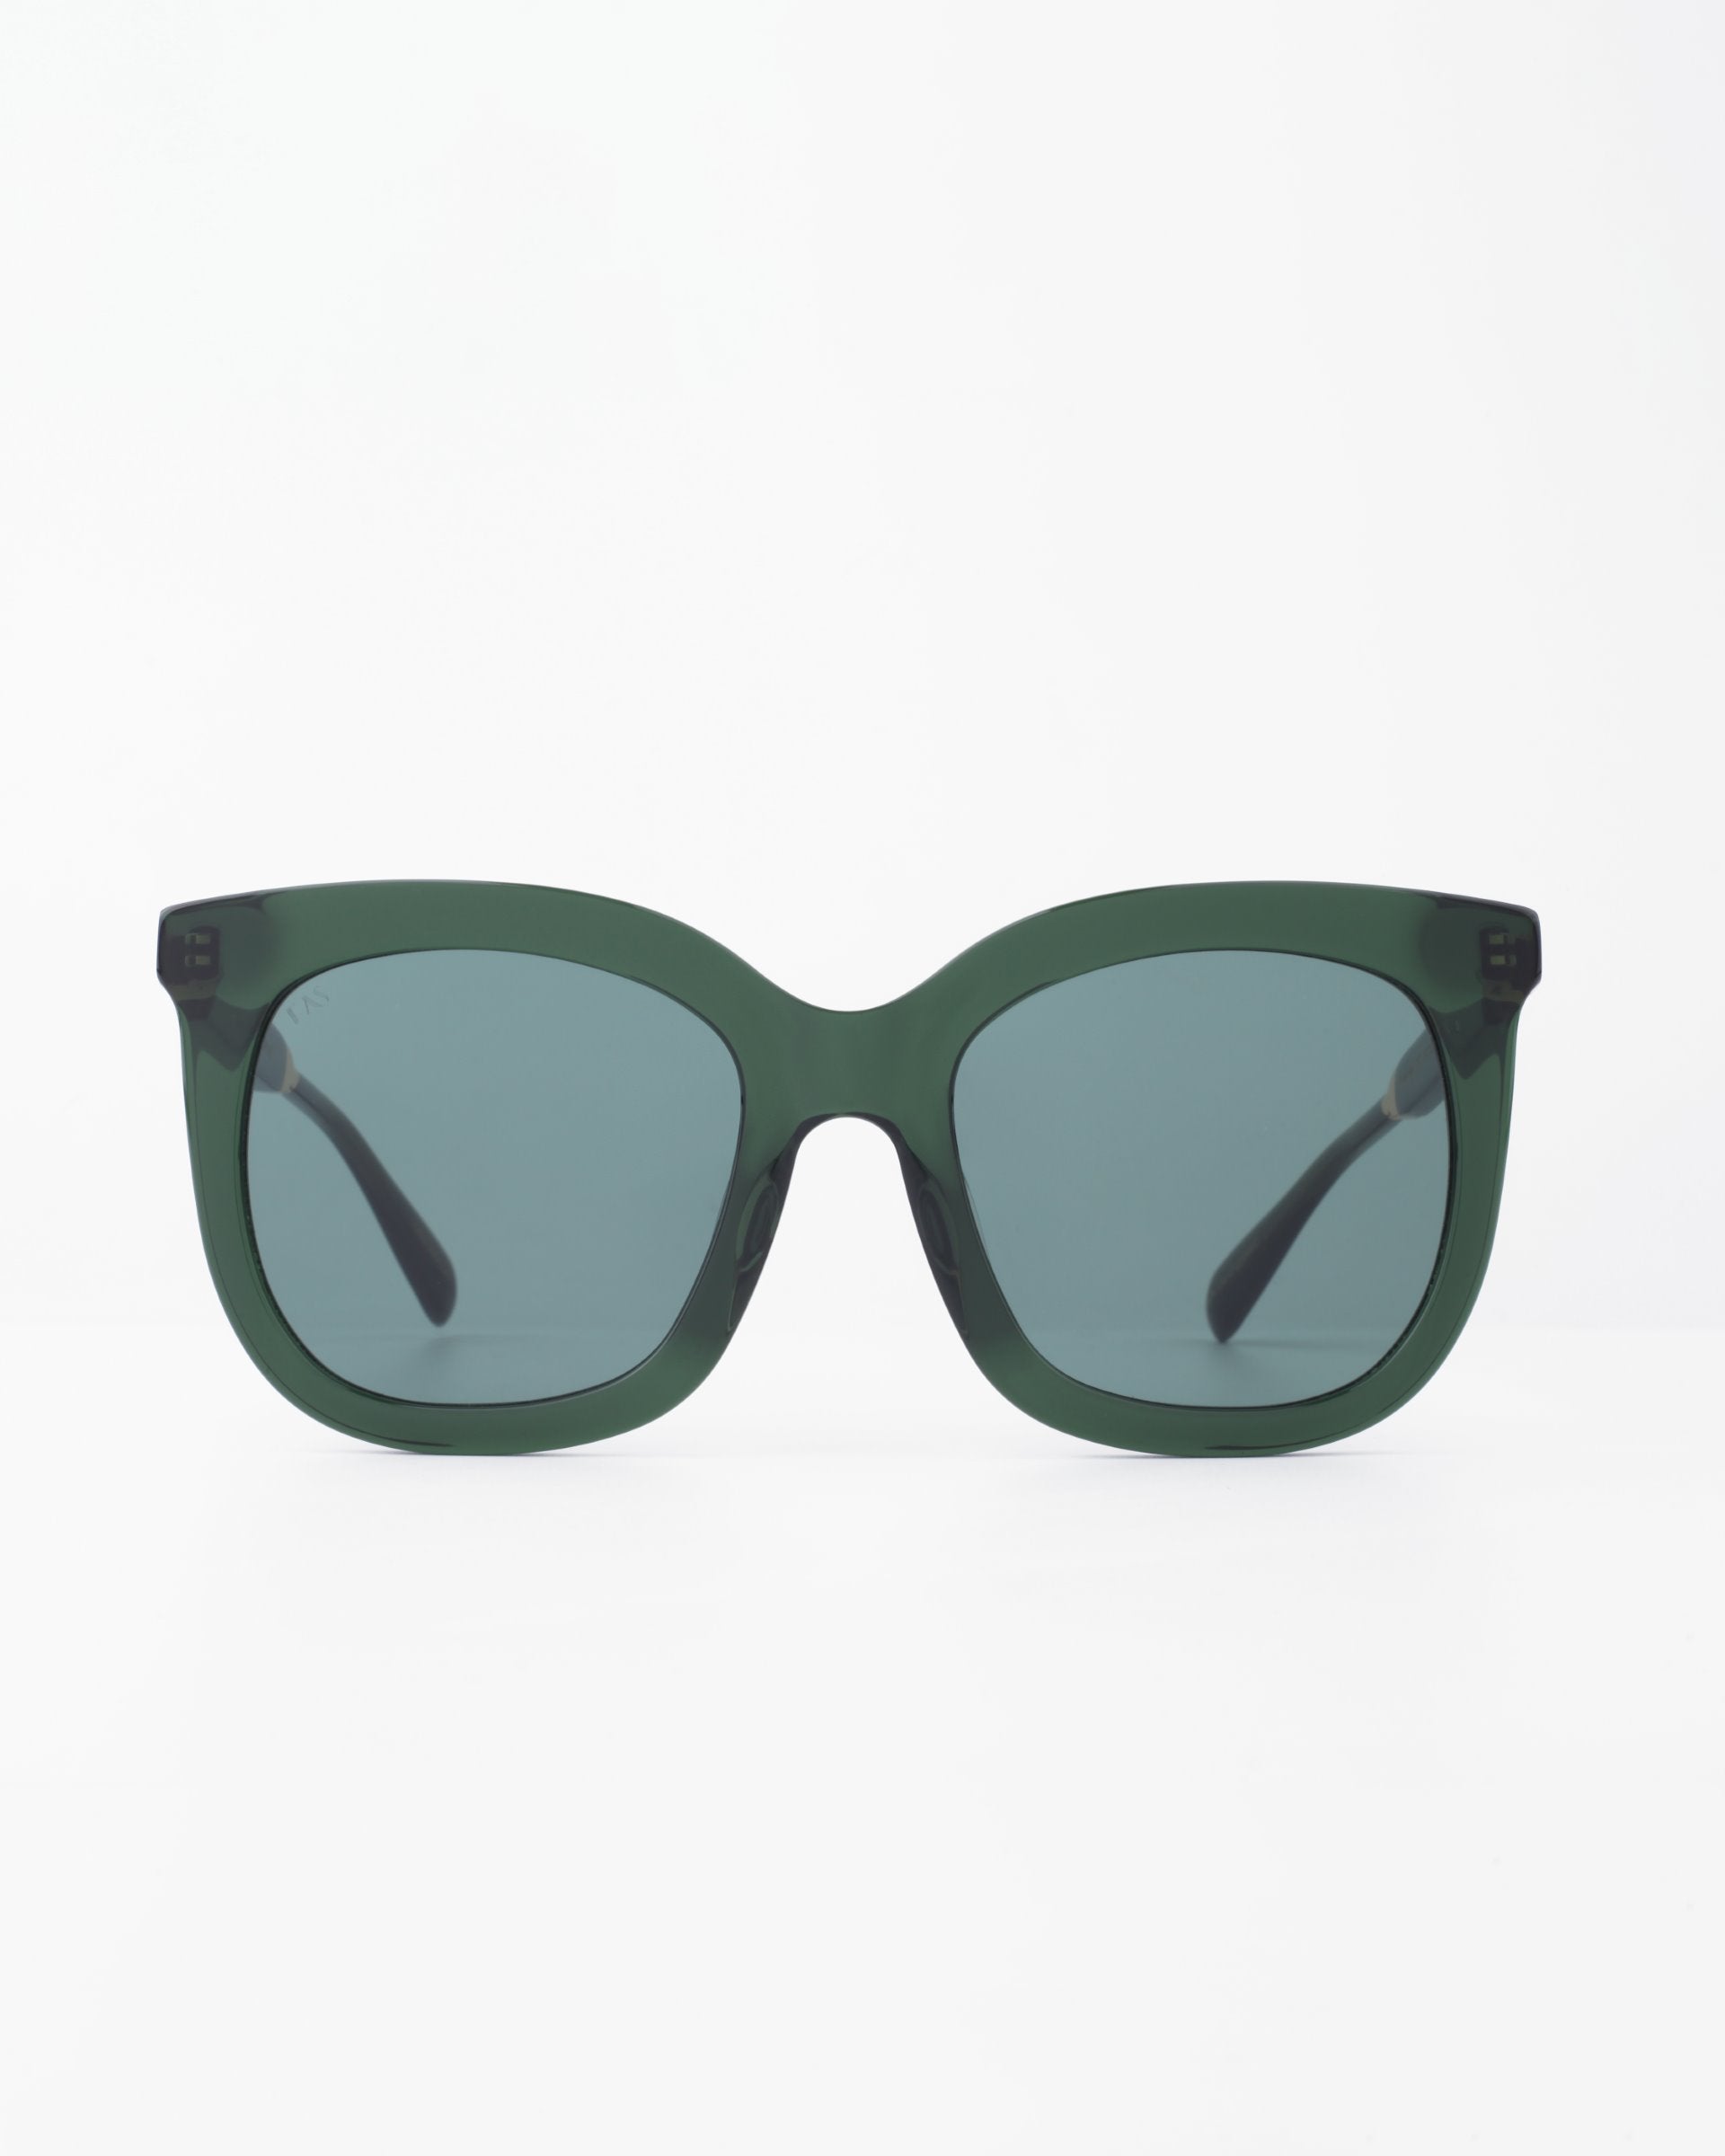 A pair of dark green, rectangular Riverside sunglasses by For Art&#39;s Sake® with slightly curved edges and shatter-resistant dark lenses, displayed against a plain white background. The handmade acetate frame features black temples that are slightly visible from this frontal view.